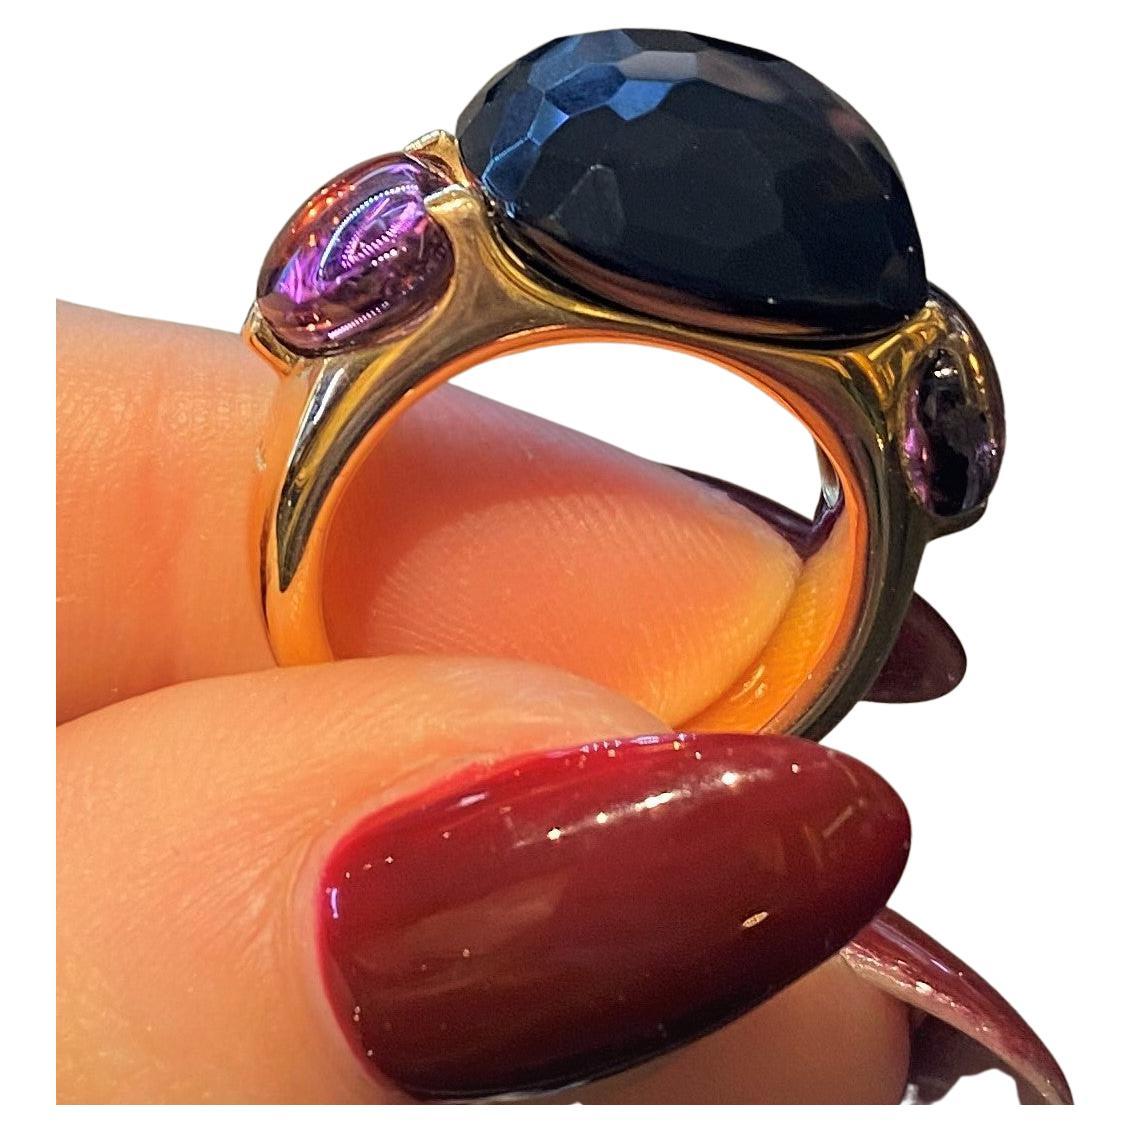 Pomellato Capri Collection Ring in 18 Karat Rose Gold with a central faceted Onyx stone sided by two cabochon red tourmalines
Size 54.
Original Price: €6,500
READY TO SHIP
*Shipment of this piece is not affected by COVID-19. Orders